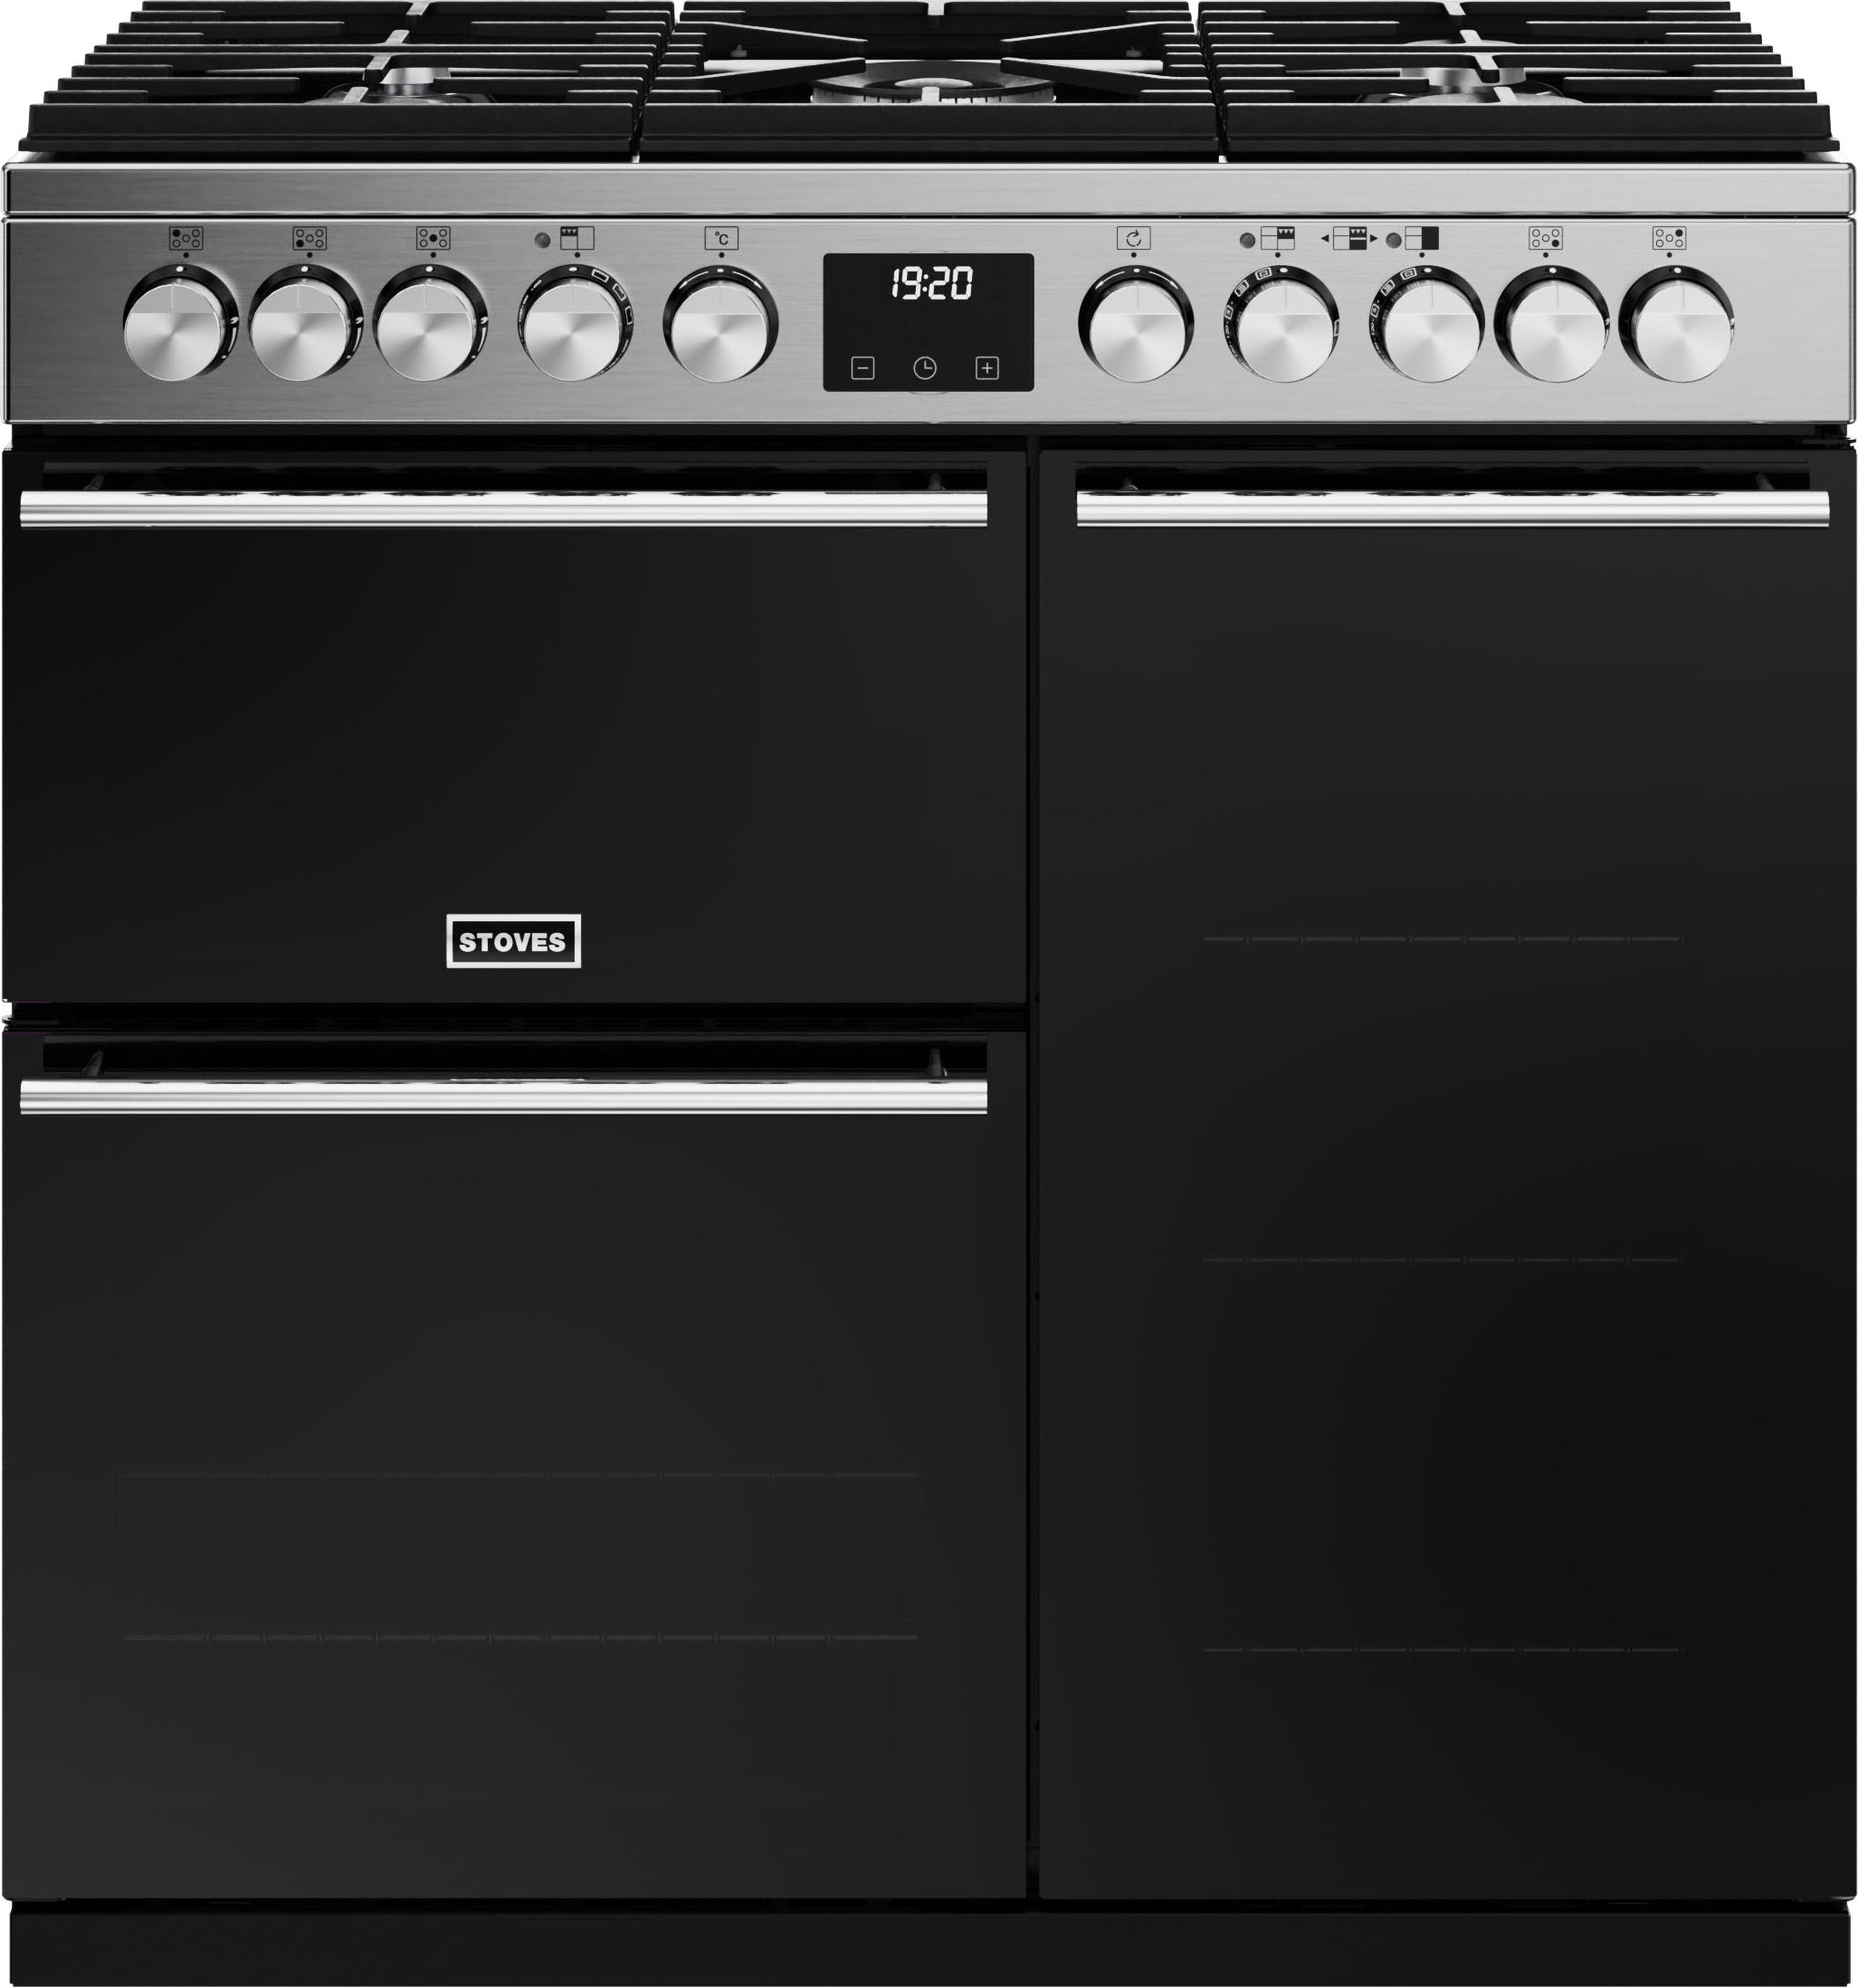 Stoves Precision Deluxe ST DX PREC D900DF SS 90cm Dual Fuel Range Cooker - Stainless Steel / Black - A/A/A Rated, Stainless Steel